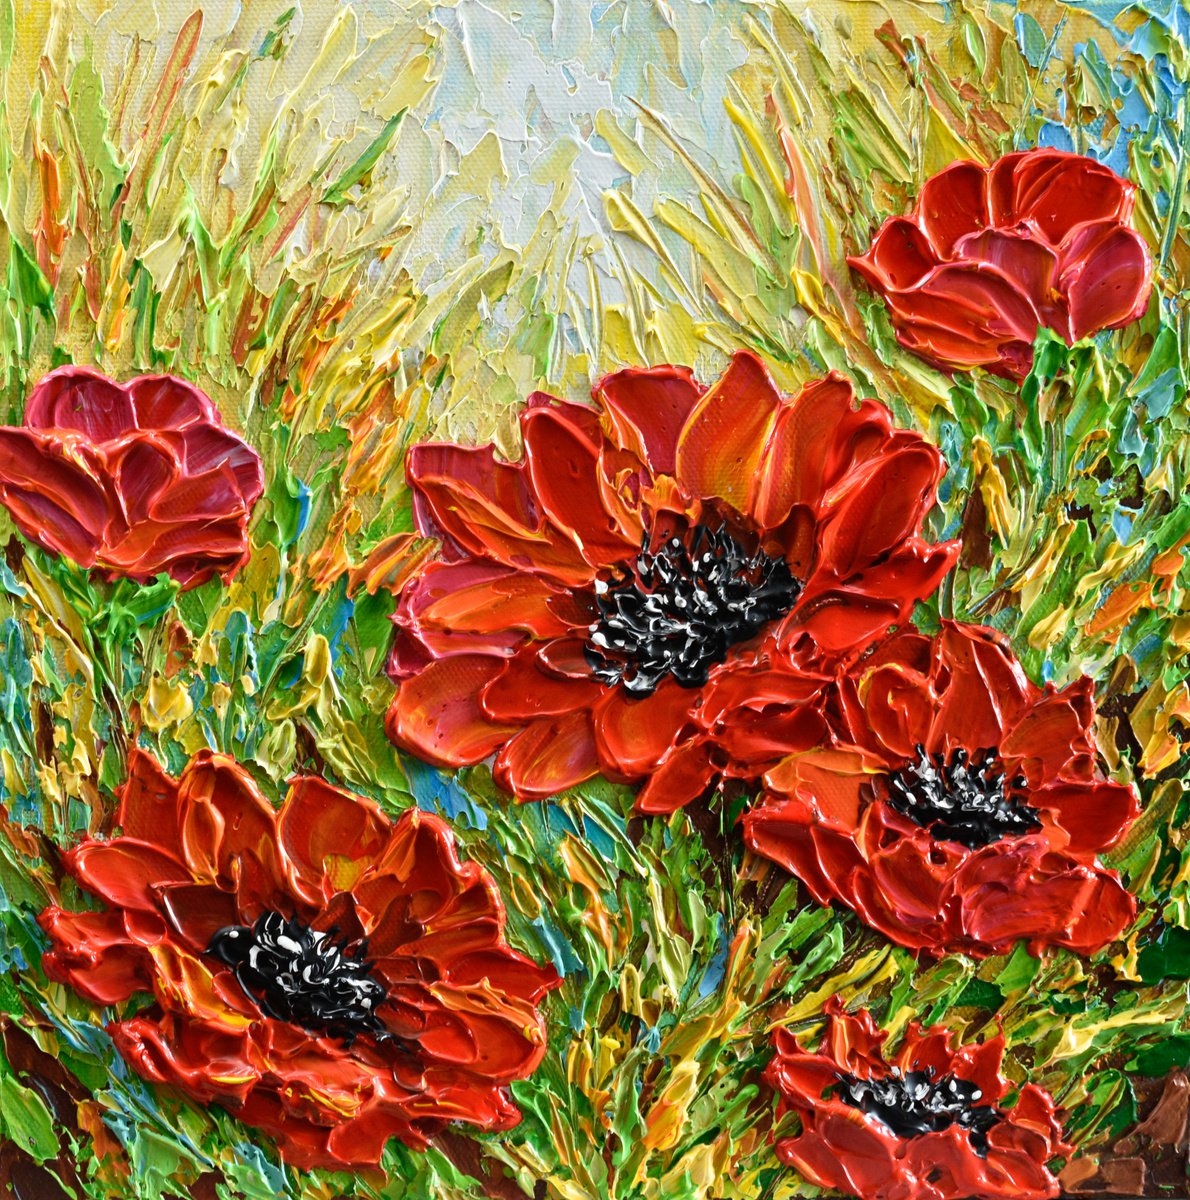 Abstract Painting Fine Art Original Acrylic Painting Acrylic Painting on Canvas Flower Painting Wall Decor Blooming Red Poppies